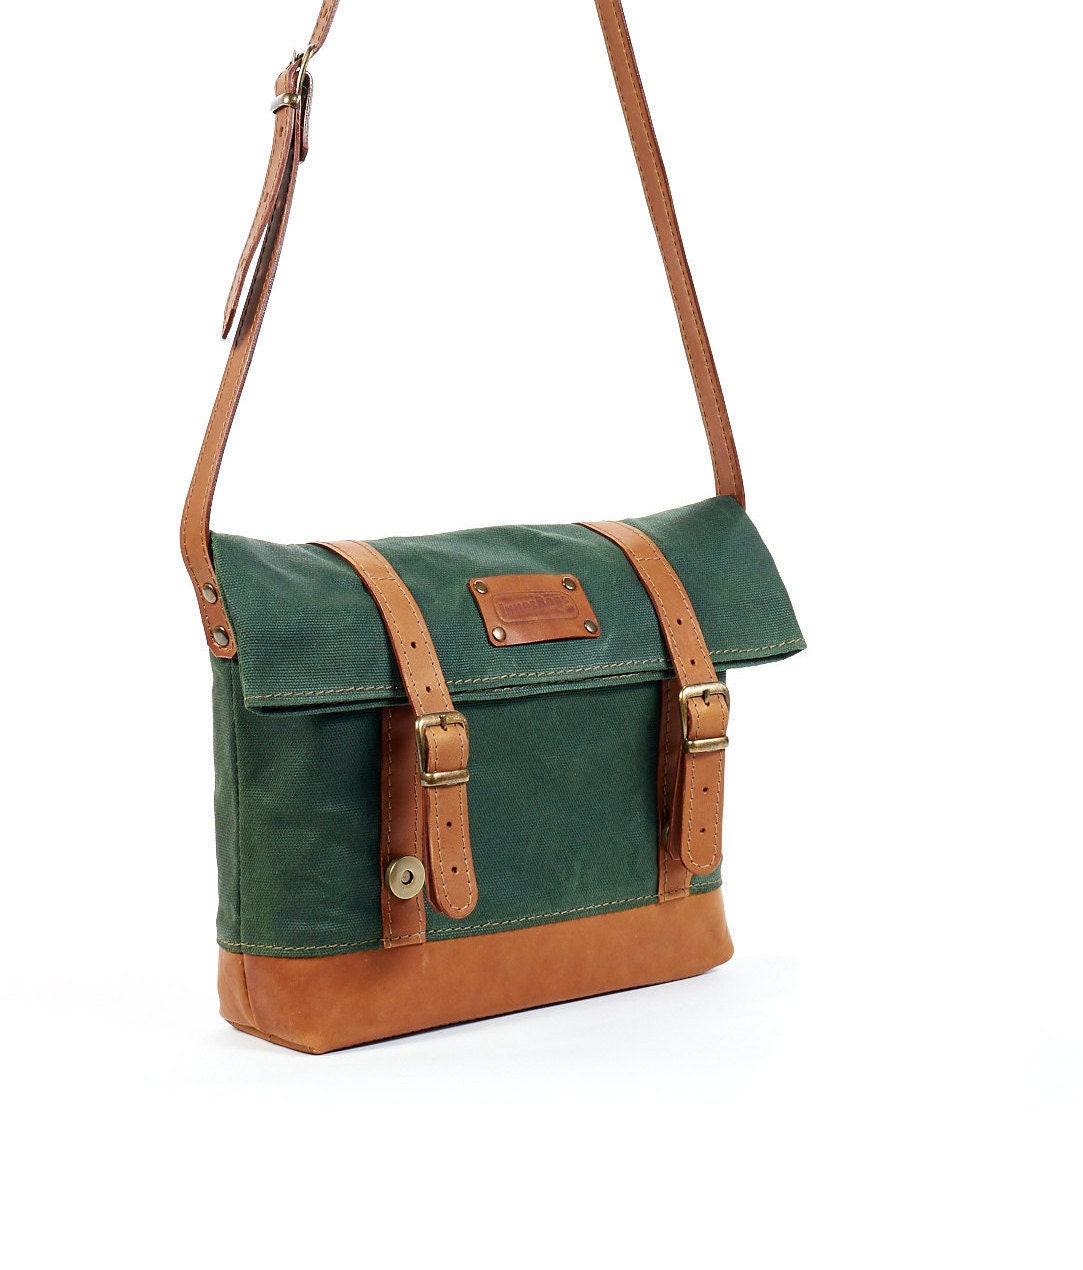 Waxed canvas and leather crossbody bag. Foldover bag. Green